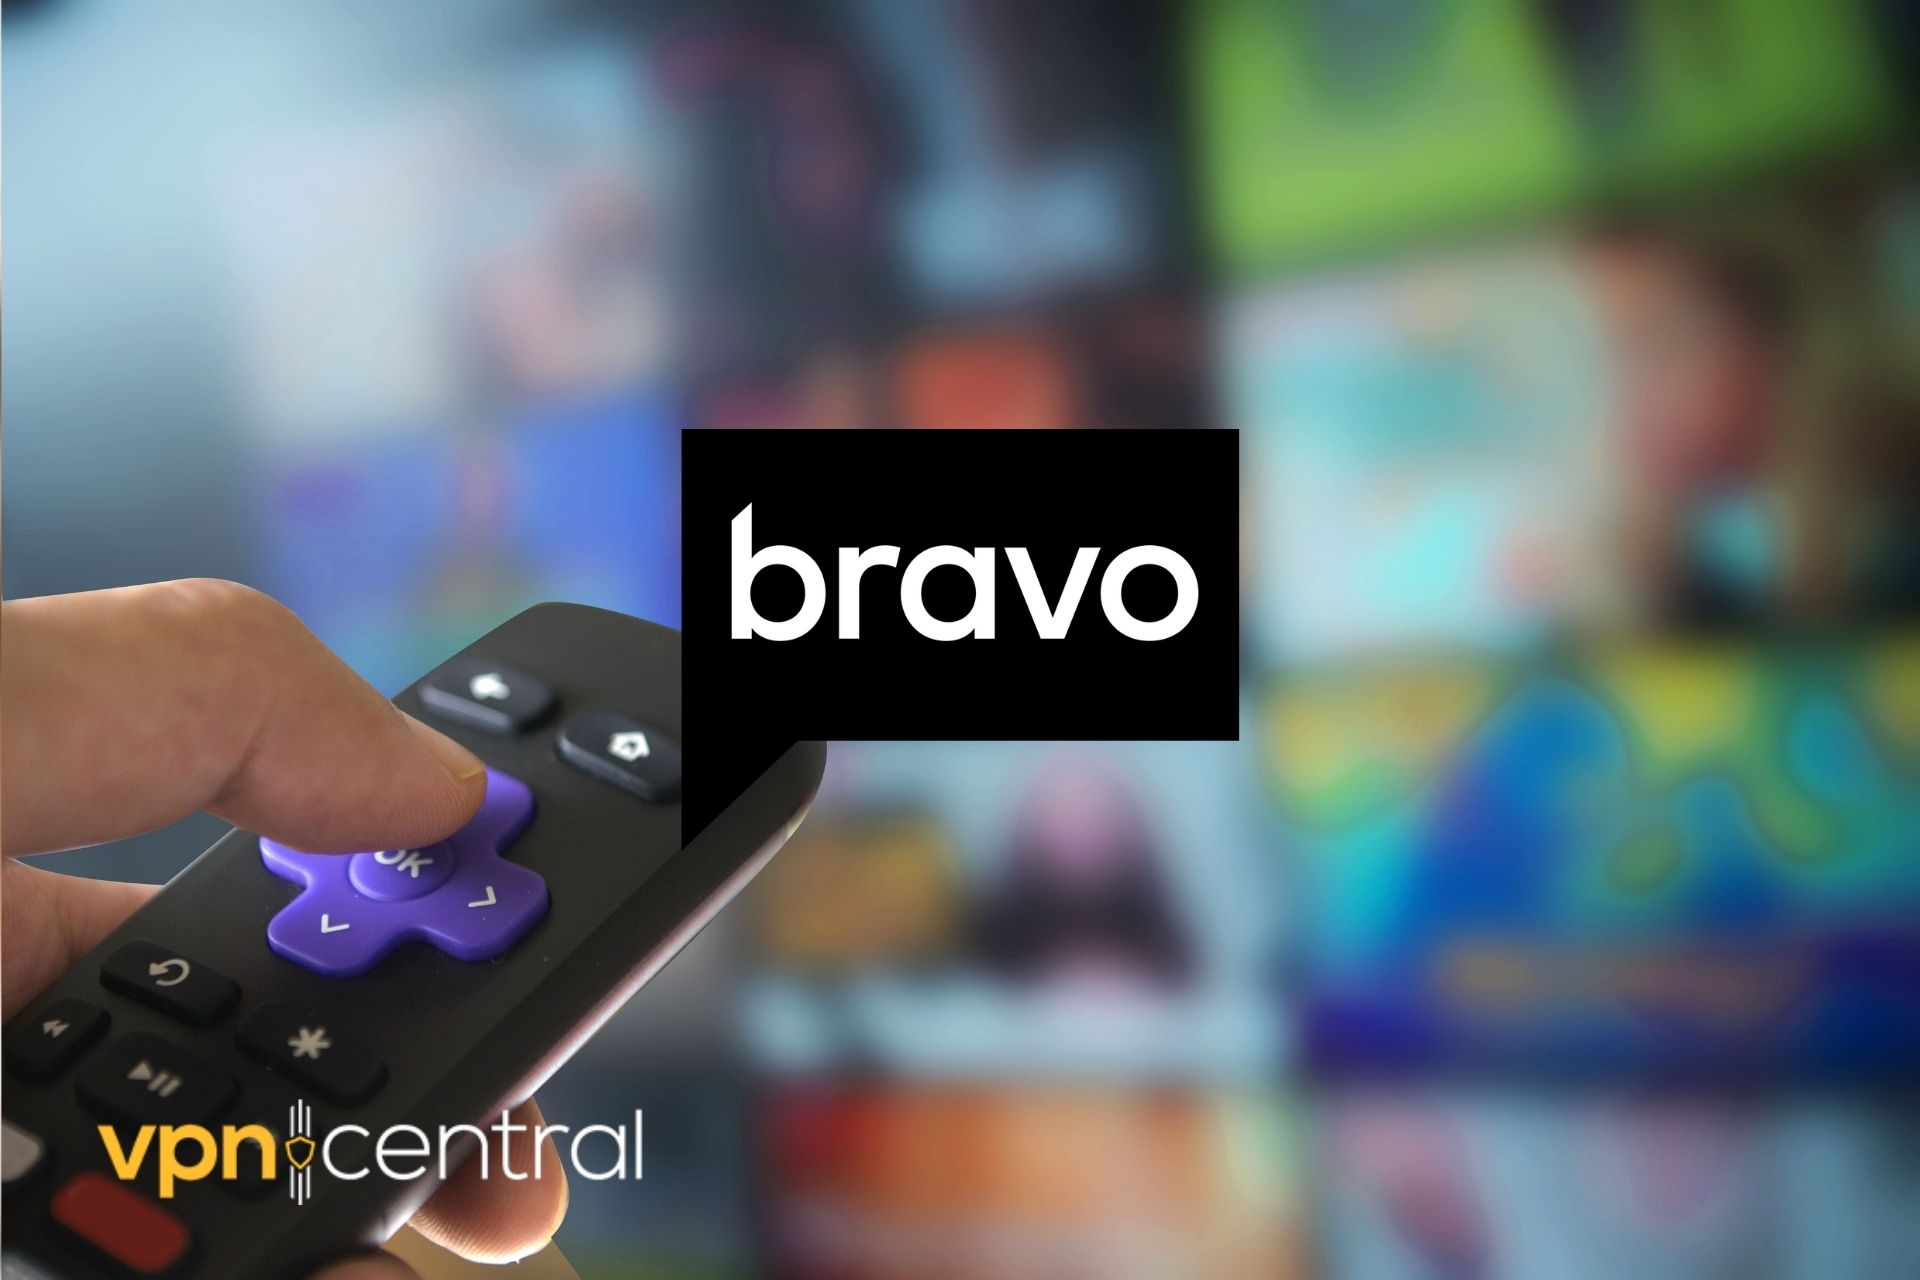 How to watch Bravo TV in Europe